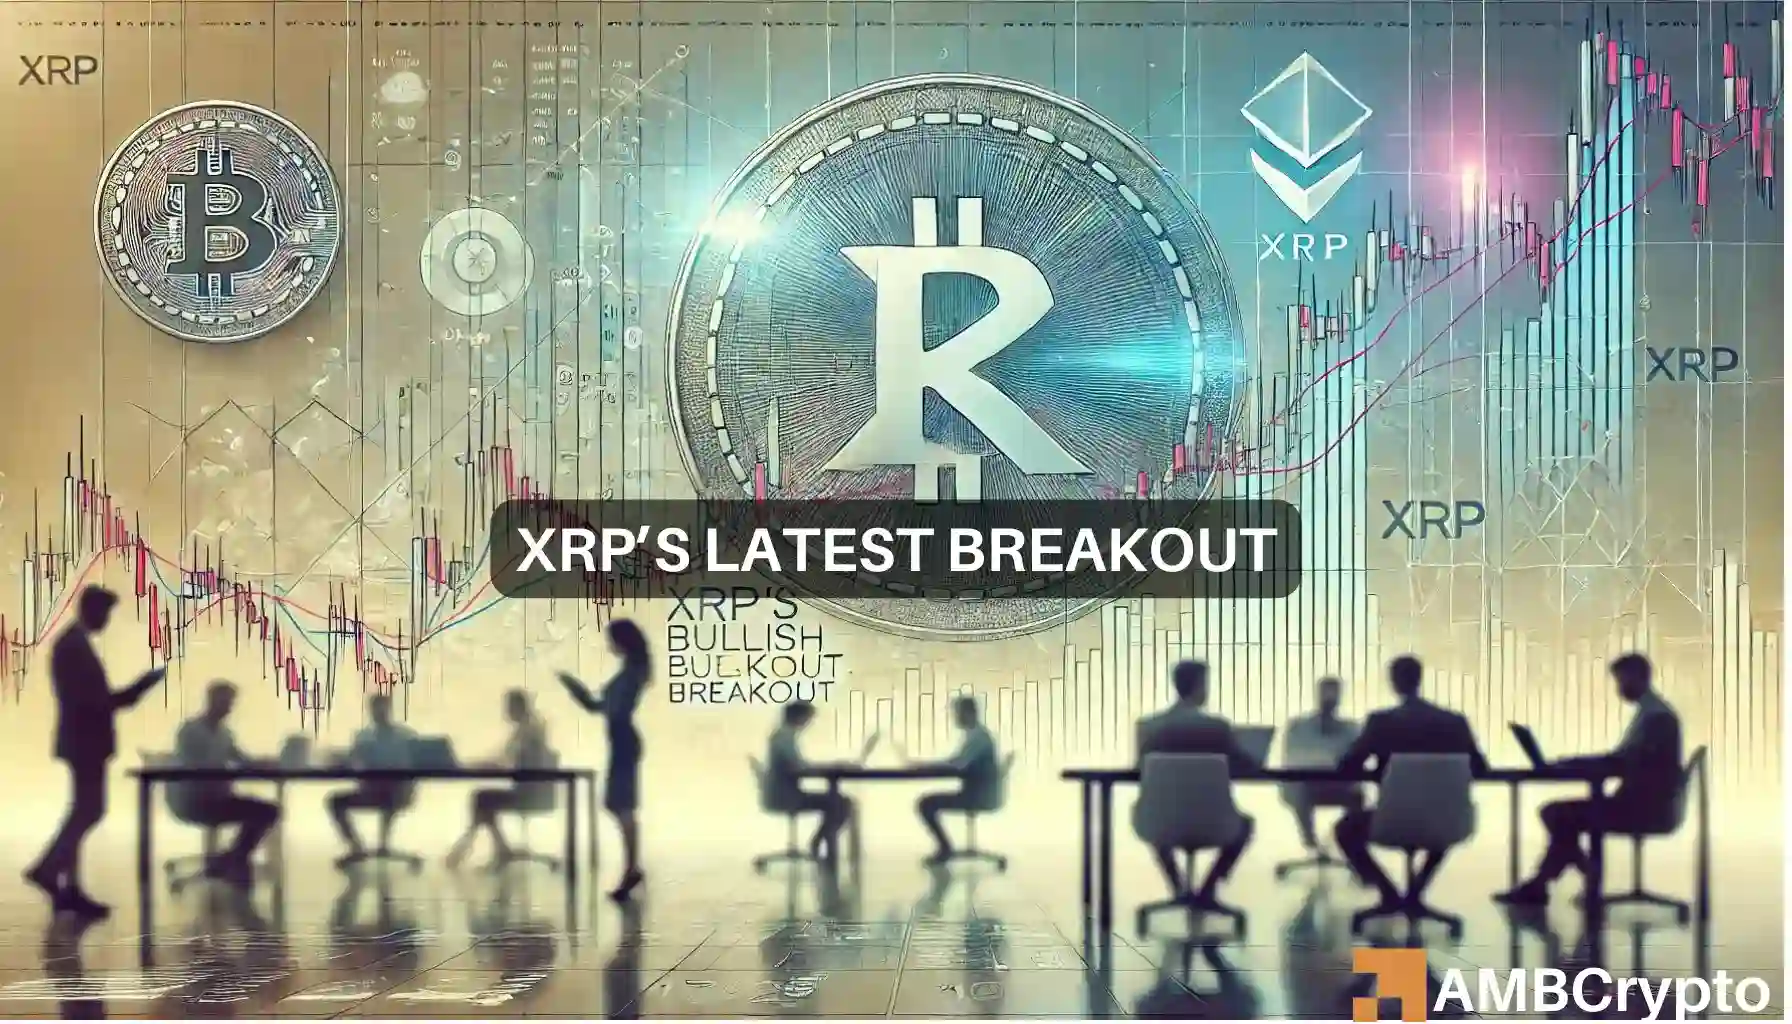 Is Ripple’s XRP poised for a new rally this week? Find out here!